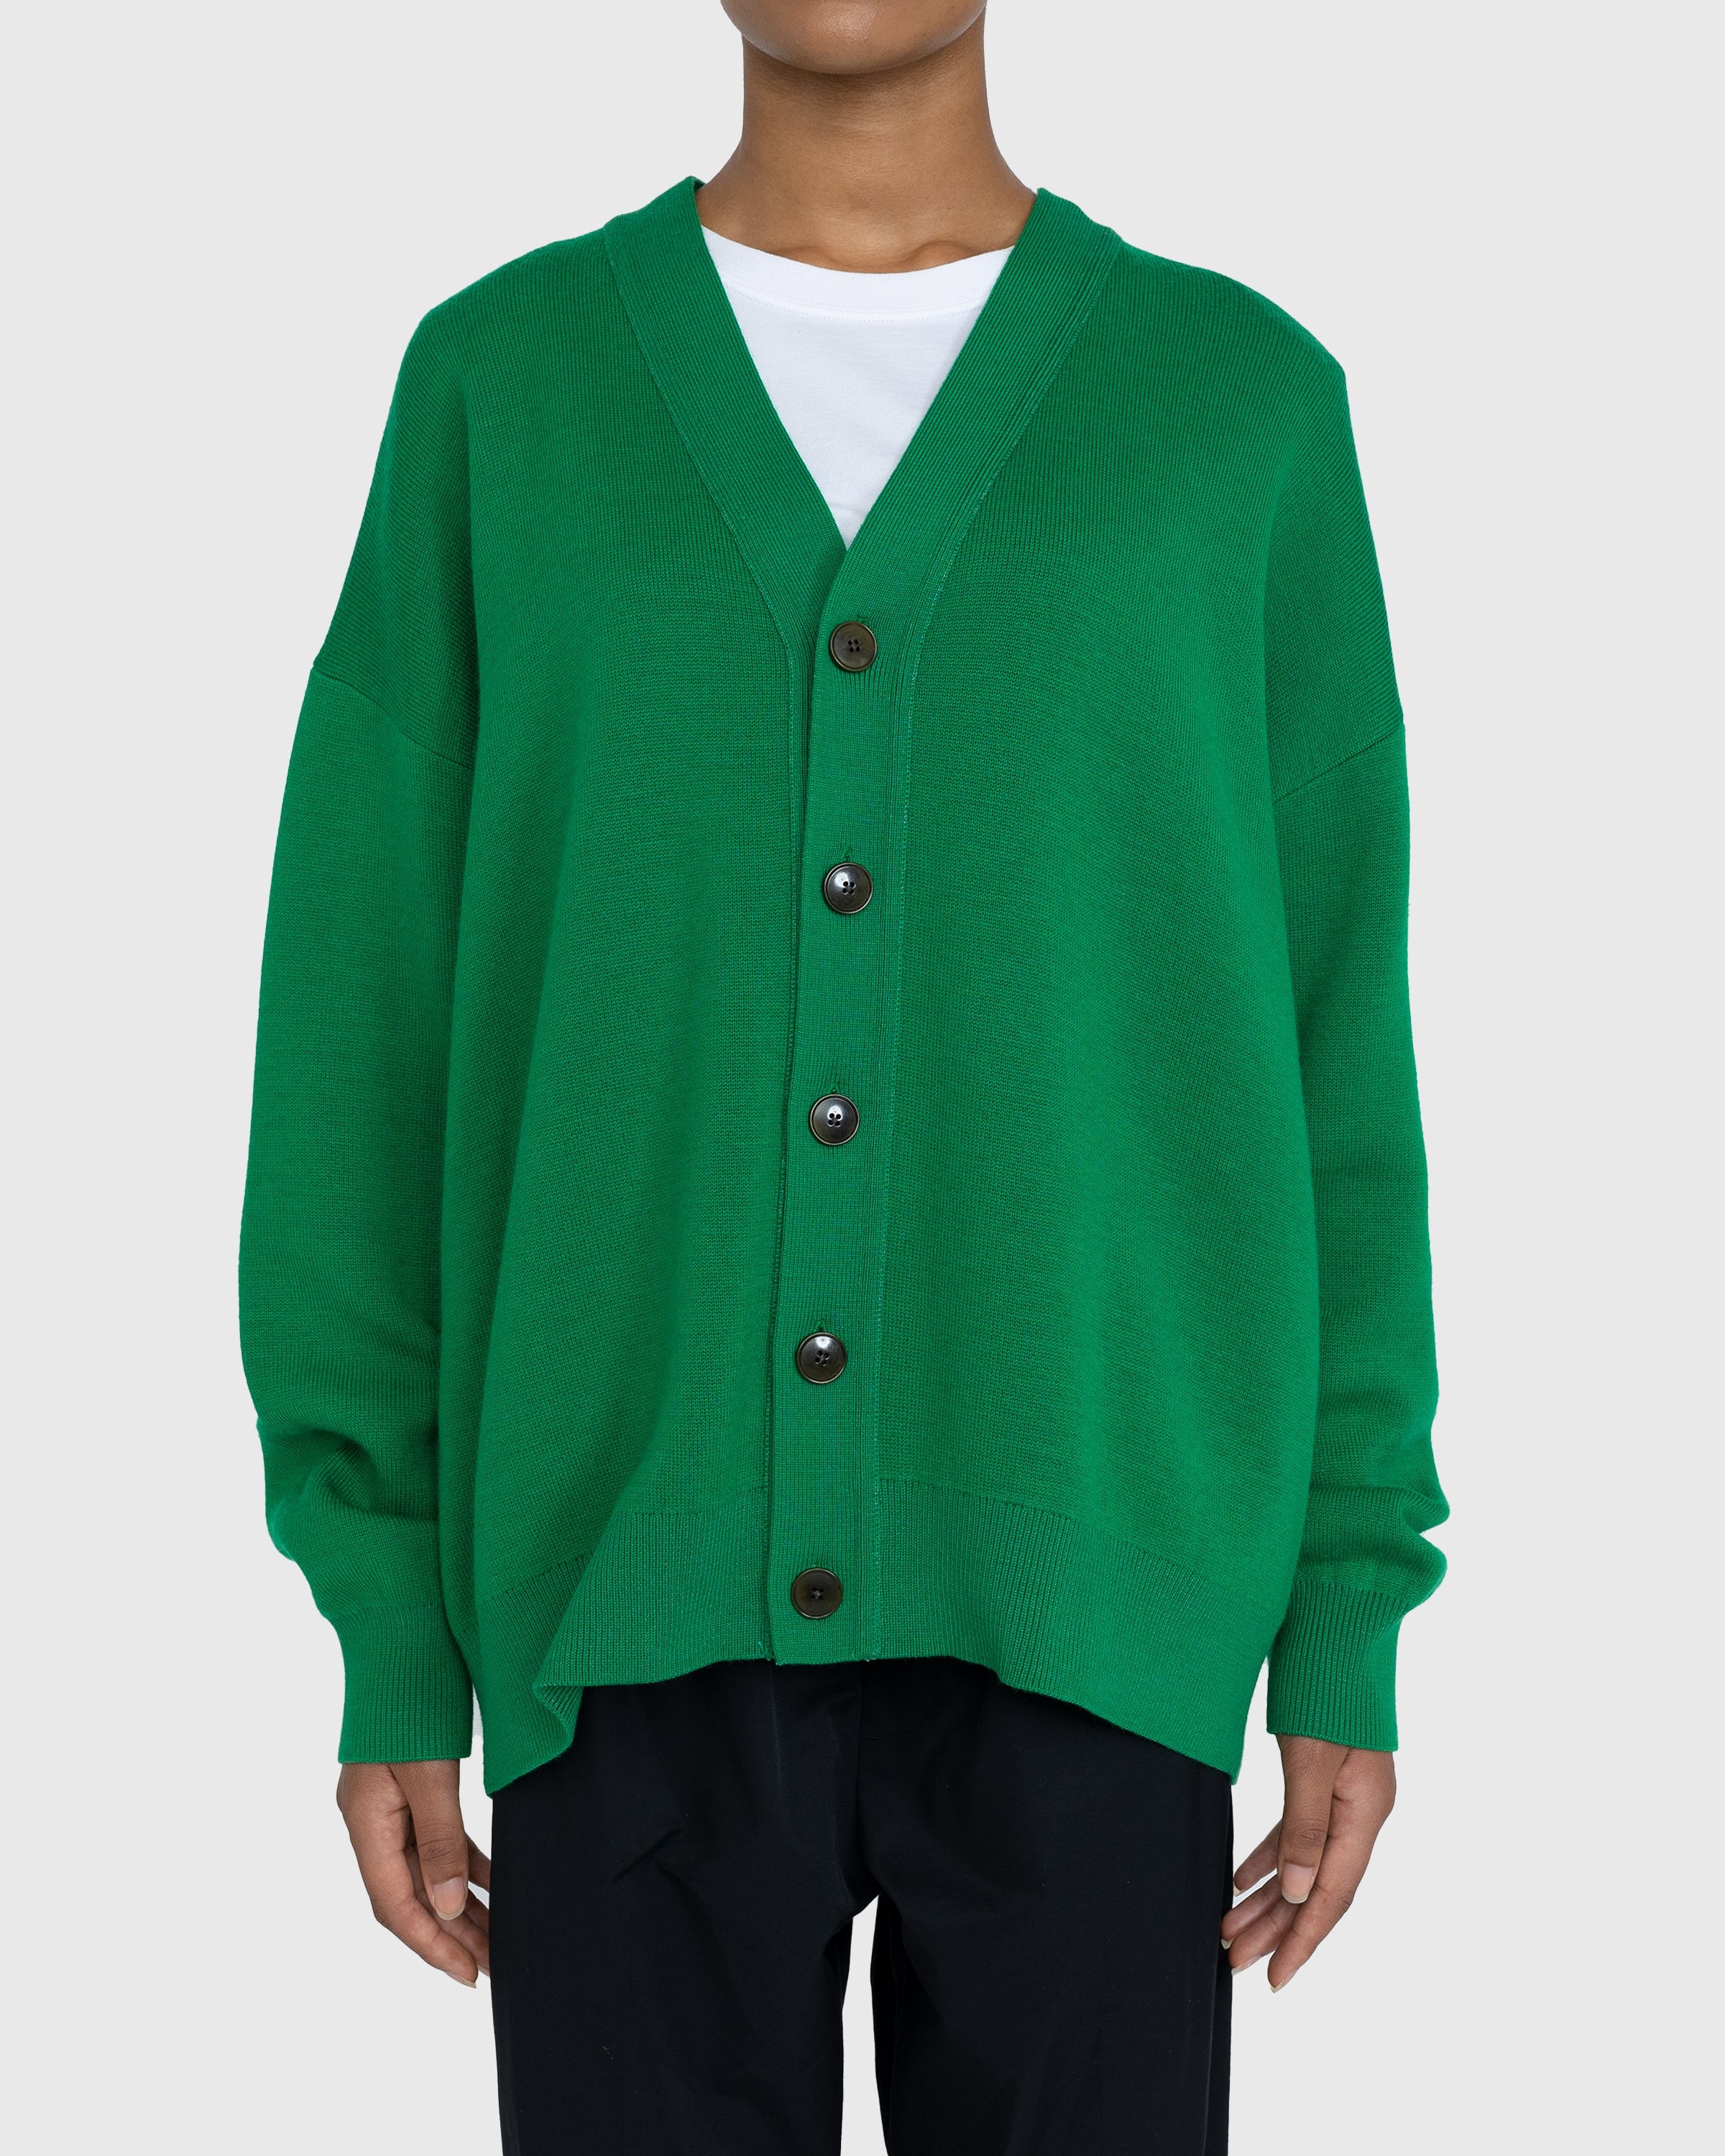 Acne Studios – Wool Blend V-Neck Cardigan Sweater Electric Green - Cardigans - Green - Image 2